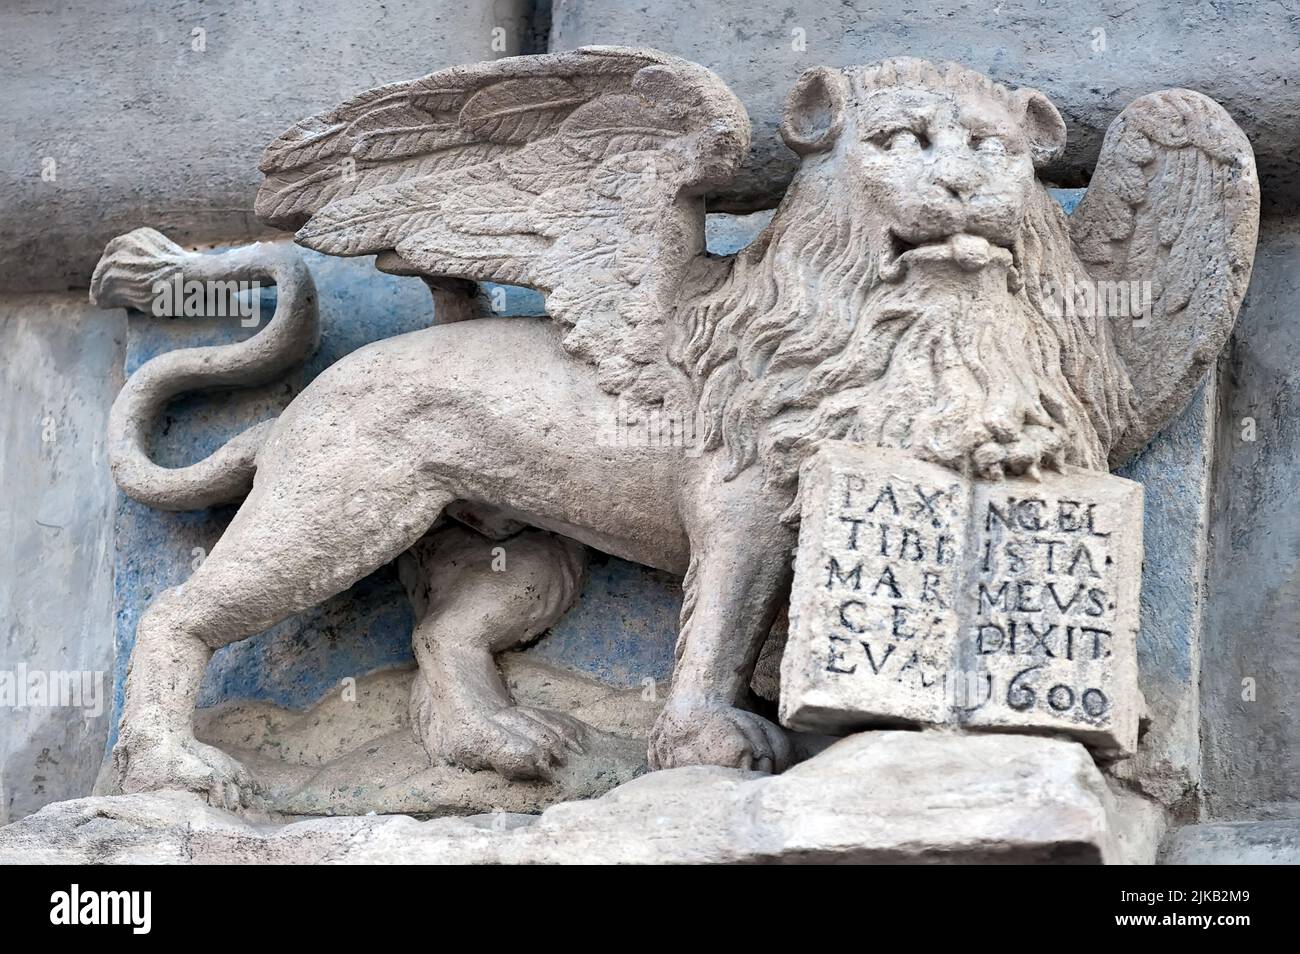 The winged Lion holding gospel with inscription PAX TIBI MARCE EVANGELISTA MEVS (May Peace be with you Mark my evangelist) in Lviv, Ukraine Stock Photo